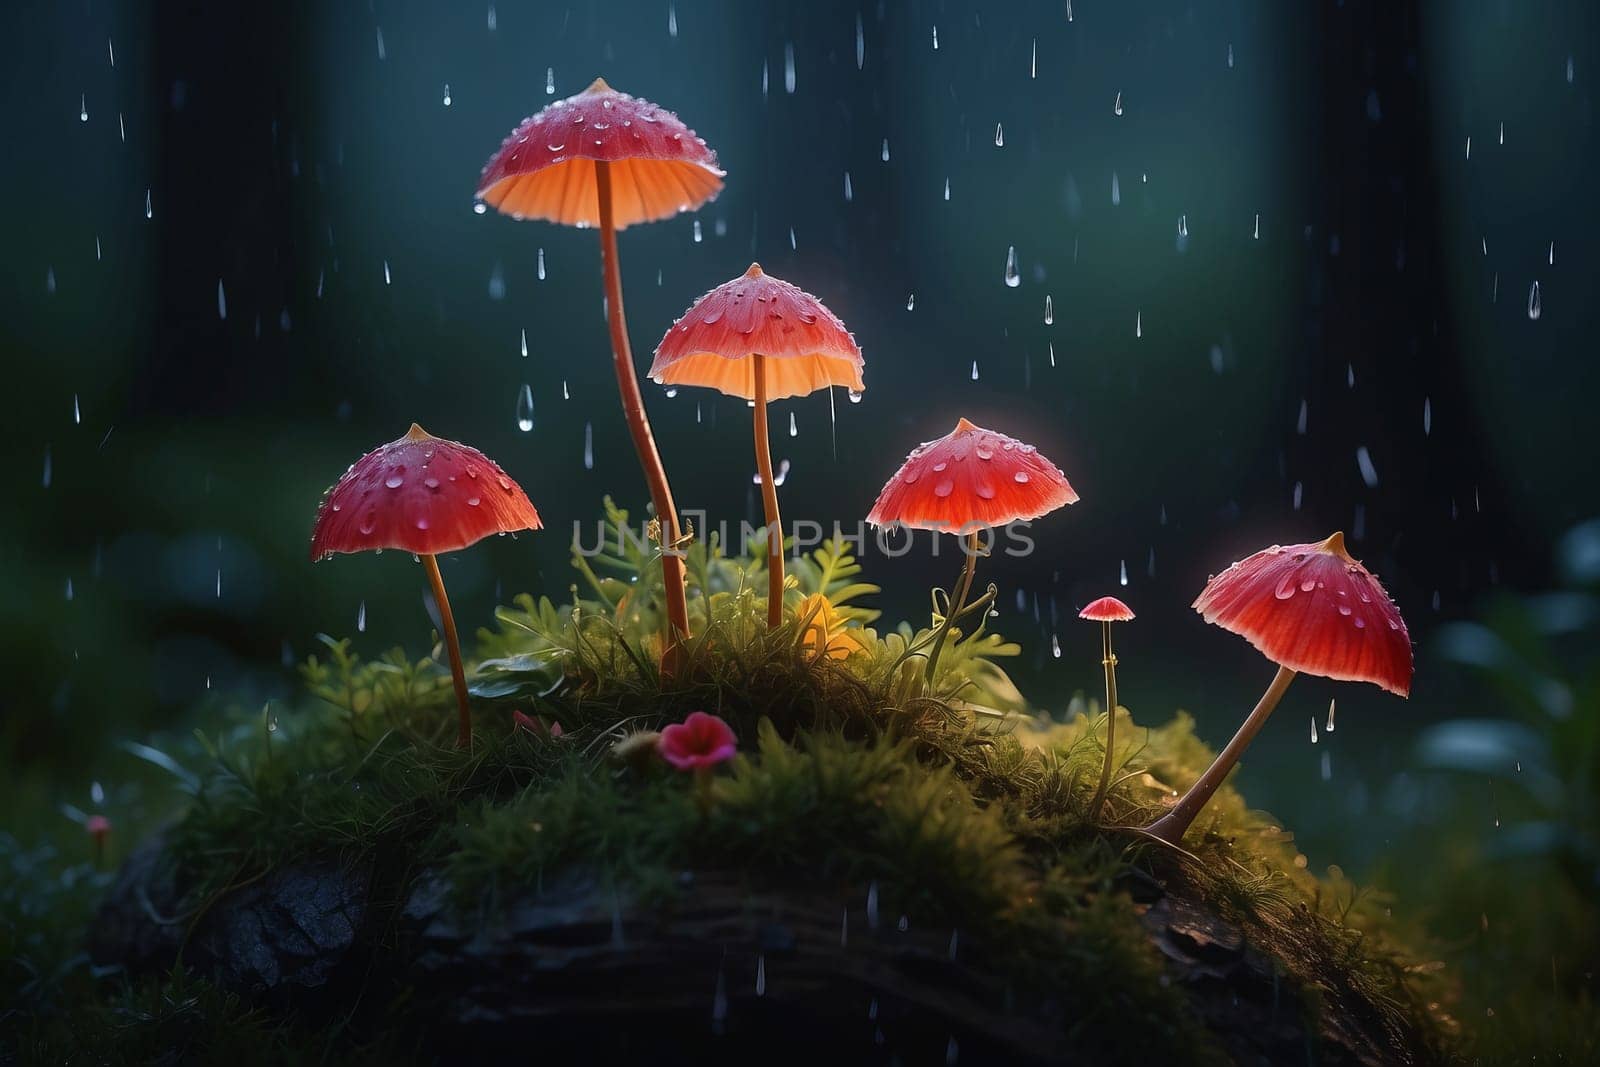 Rain in a magical forest by applesstock